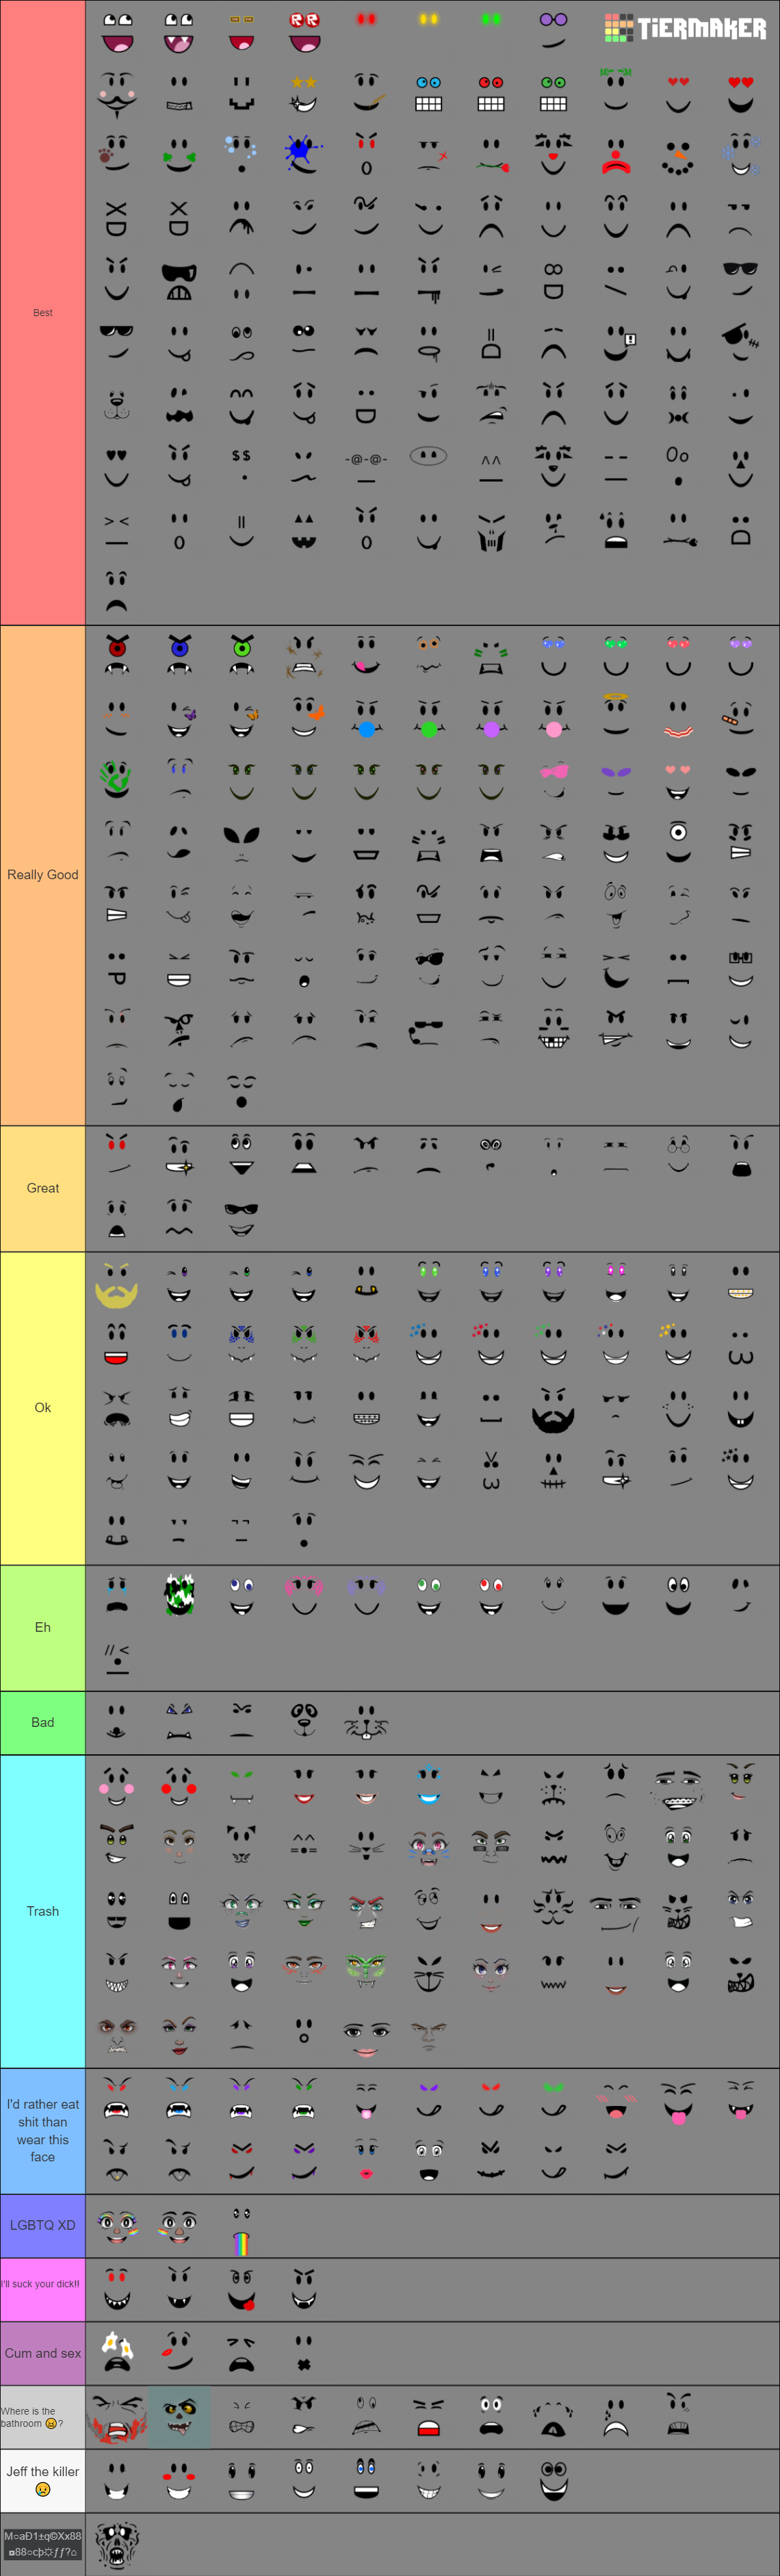 Most Popular Roblox Faces Tier List Community Rankings TierMaker